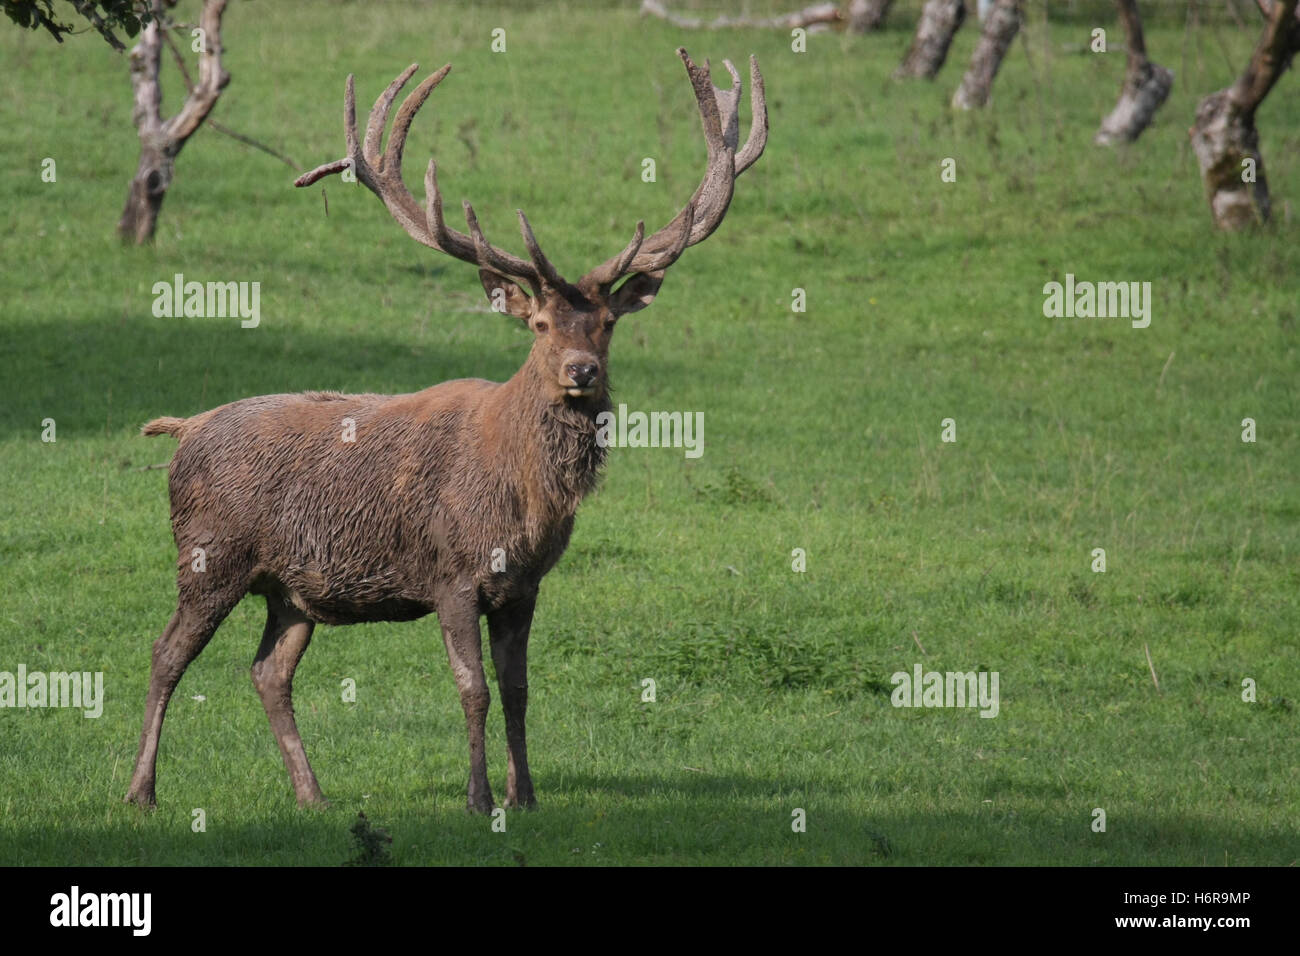 wild deer hunting chase nature hart stag animal wild animals male masculine horns deer deer stag glade meadow grass lawn green Stock Photo